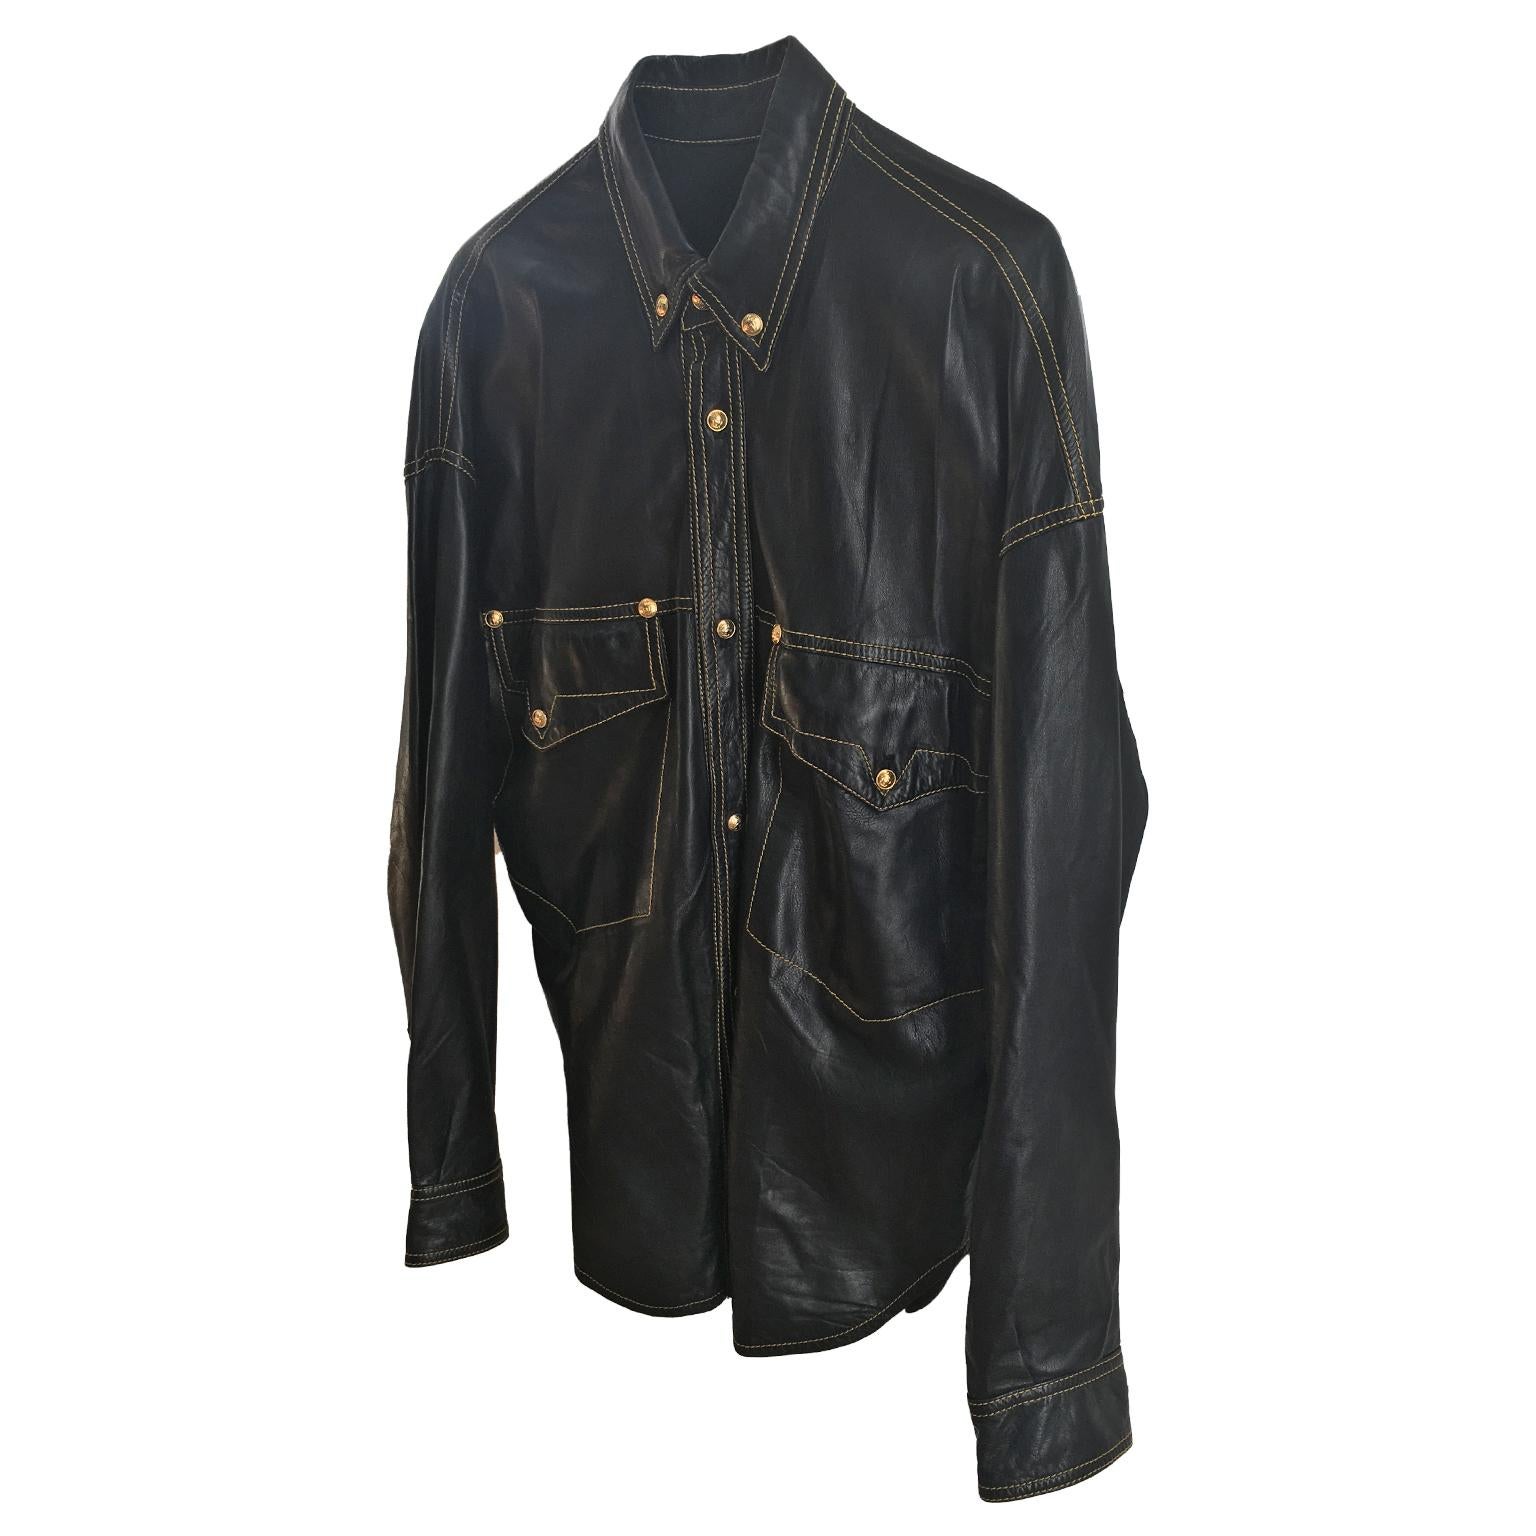 A legendary iconic shirt from the 1993 spring summer runway by Gianni Versace. 
Golden tone medusa head buttons, yellow cover stitch on black soft leather.
From neck point to cuff : 81 cm
Back length : 75 cm 

